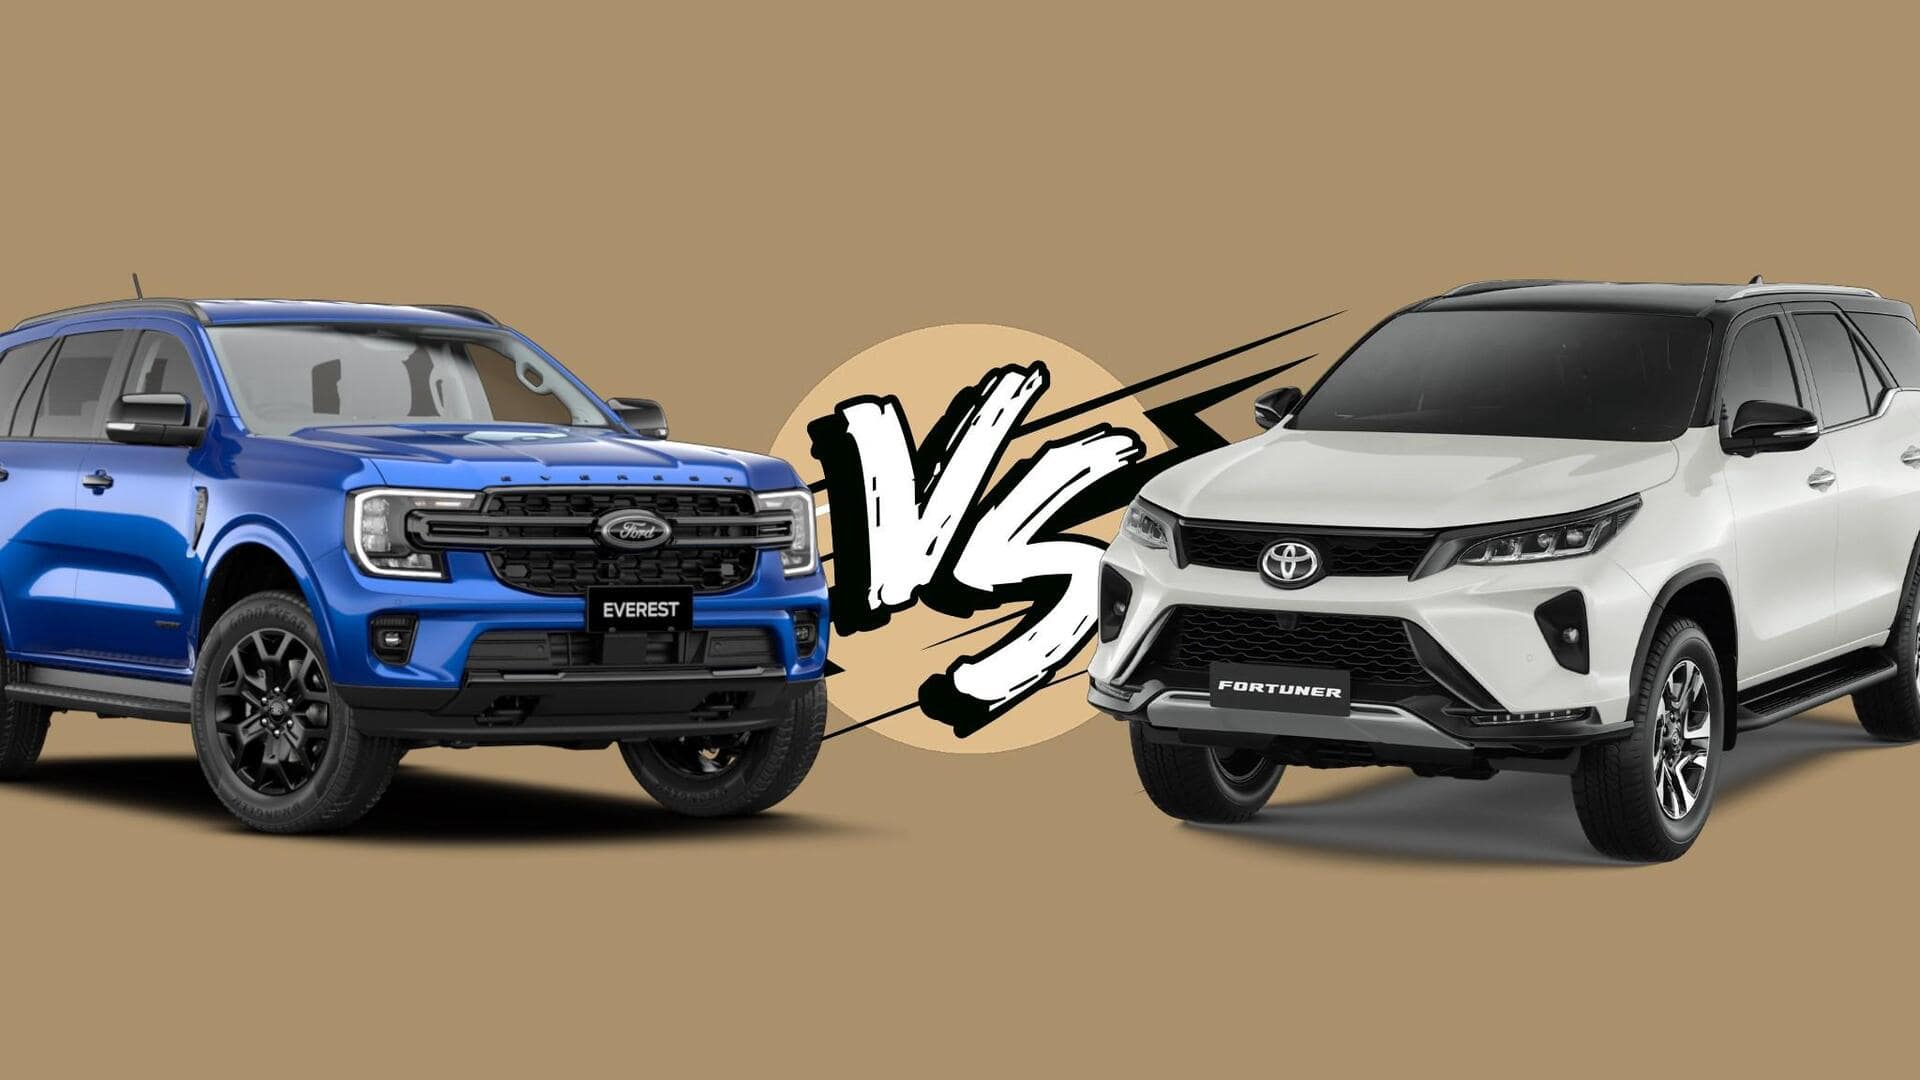 New Ford Endeavour or Toyota Fortuner: Which SUV is better